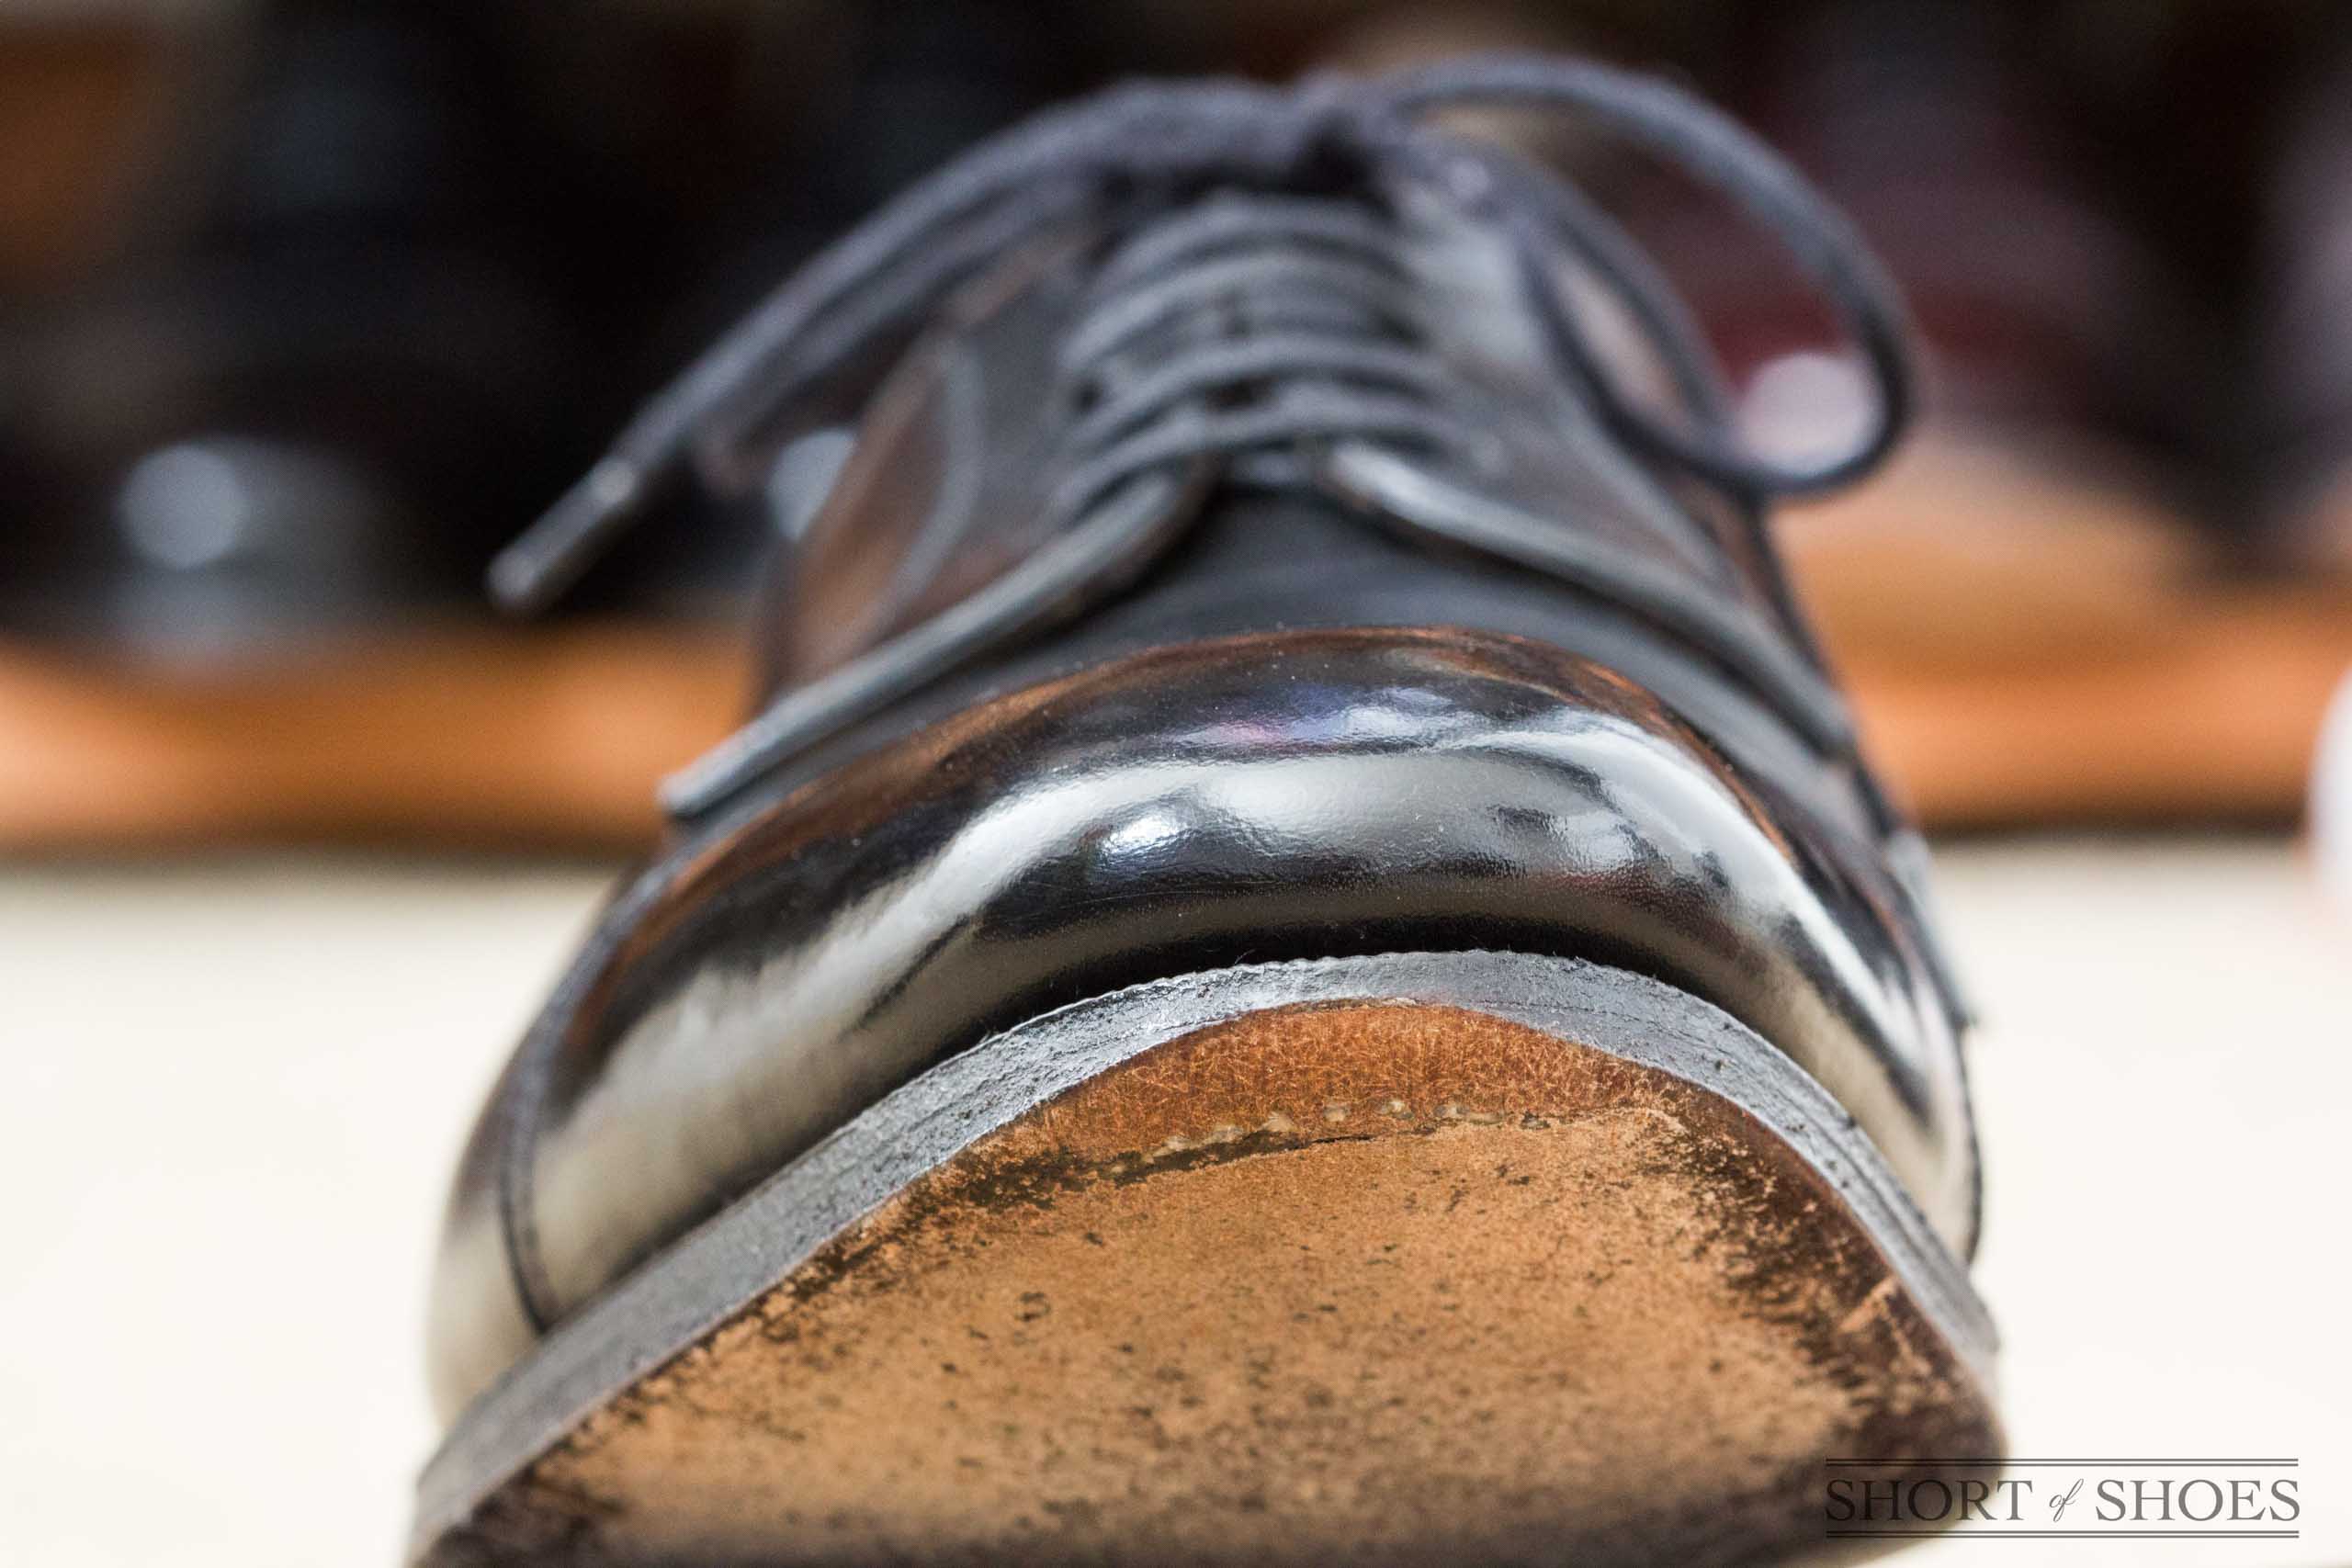 worn leather soles